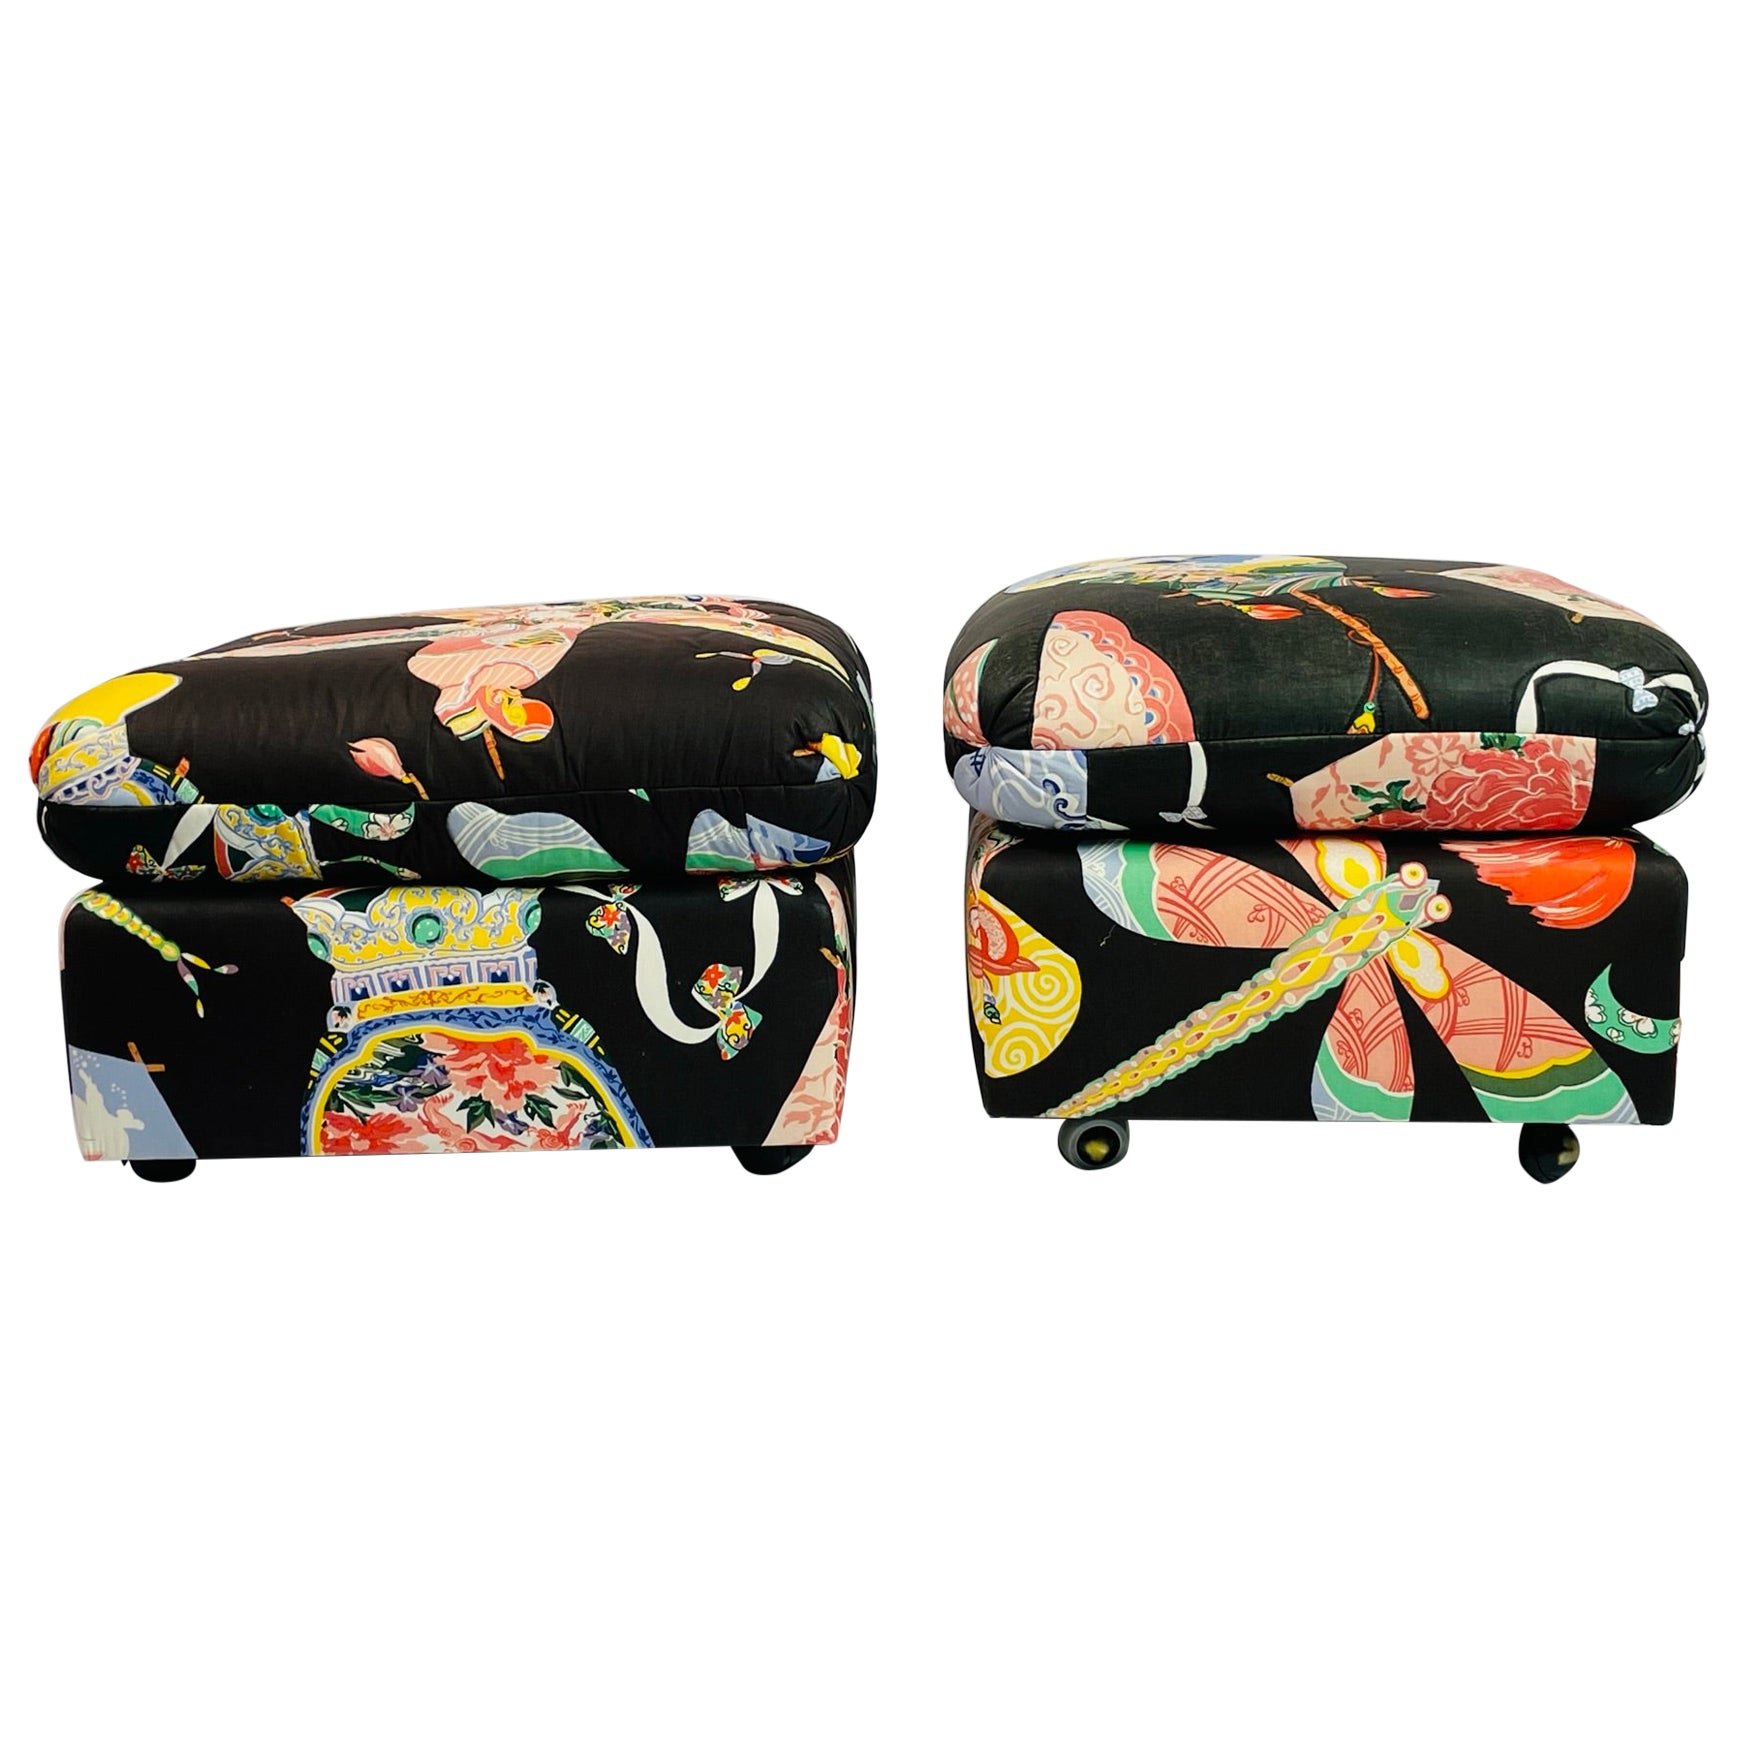 Pair of Vintage Ottomans/Poufs Upholstered in Asian Print Fabric For Sale